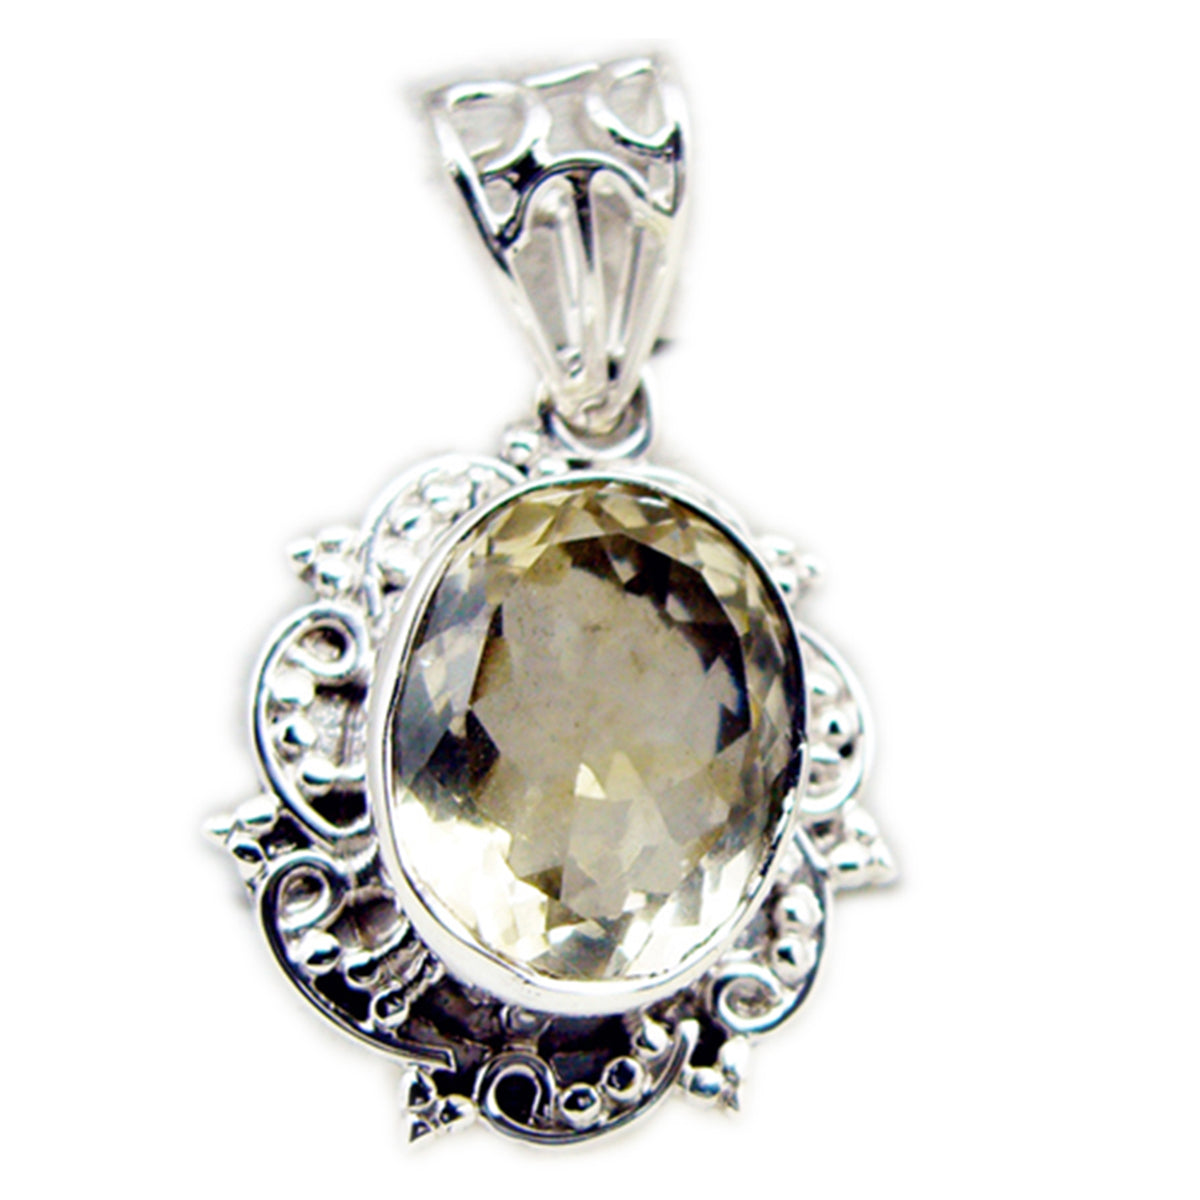 Riyo Genuine Gems Oval Faceted Yellow Citrine Solid Silver Pendant engagement gift